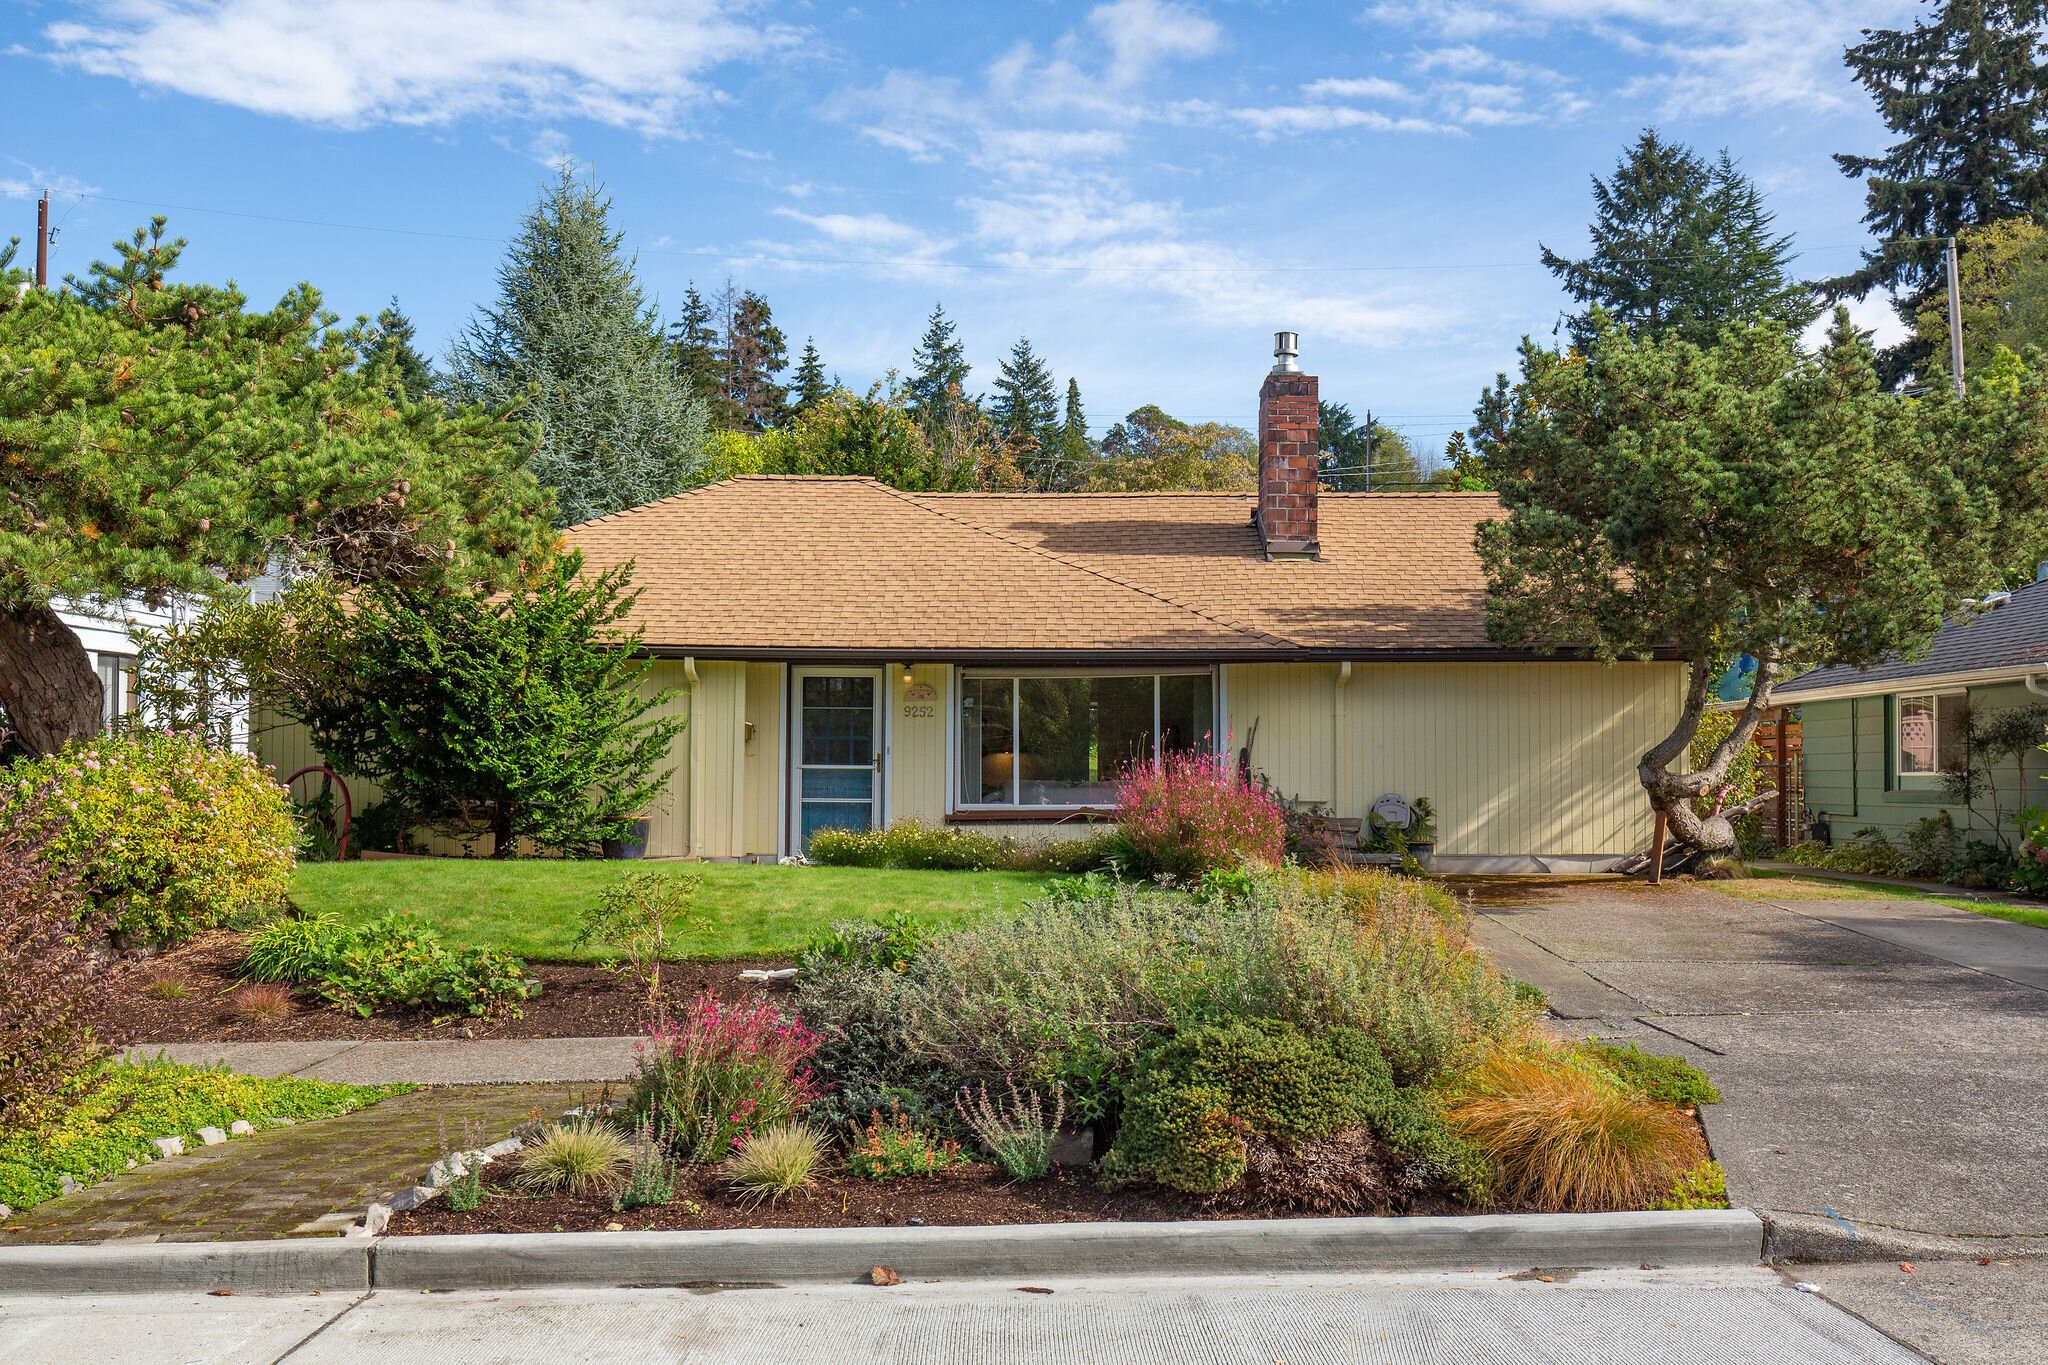  Welcome to this 1947 Westwood rambler, a solid Seattle home in a neighborhood with an 87 Walkscore. Walk everywhere or just stay put in the beautiful backyard on a double lot. 